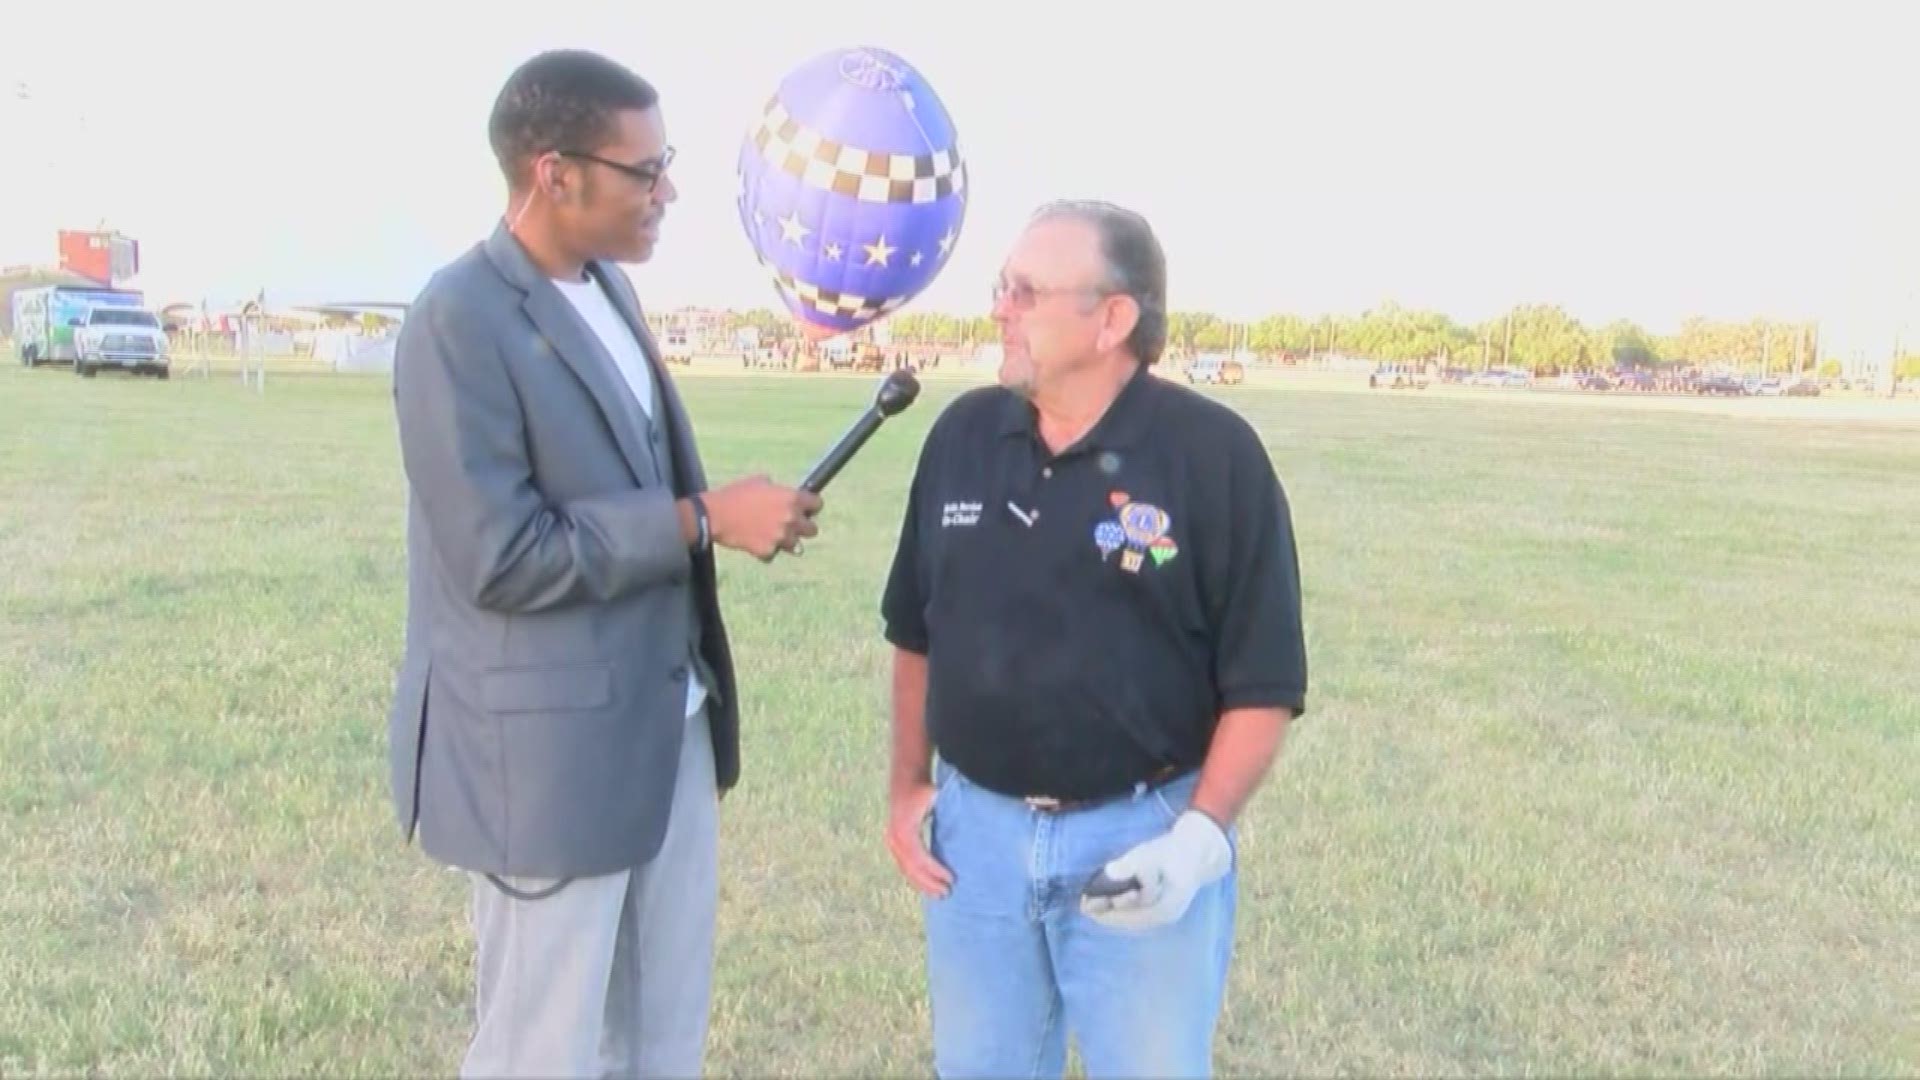 Our Malik Mingo is live at the John Glenn Middle School football field with details on the 2nd annual San Angelo Lions Club Balloonfest.